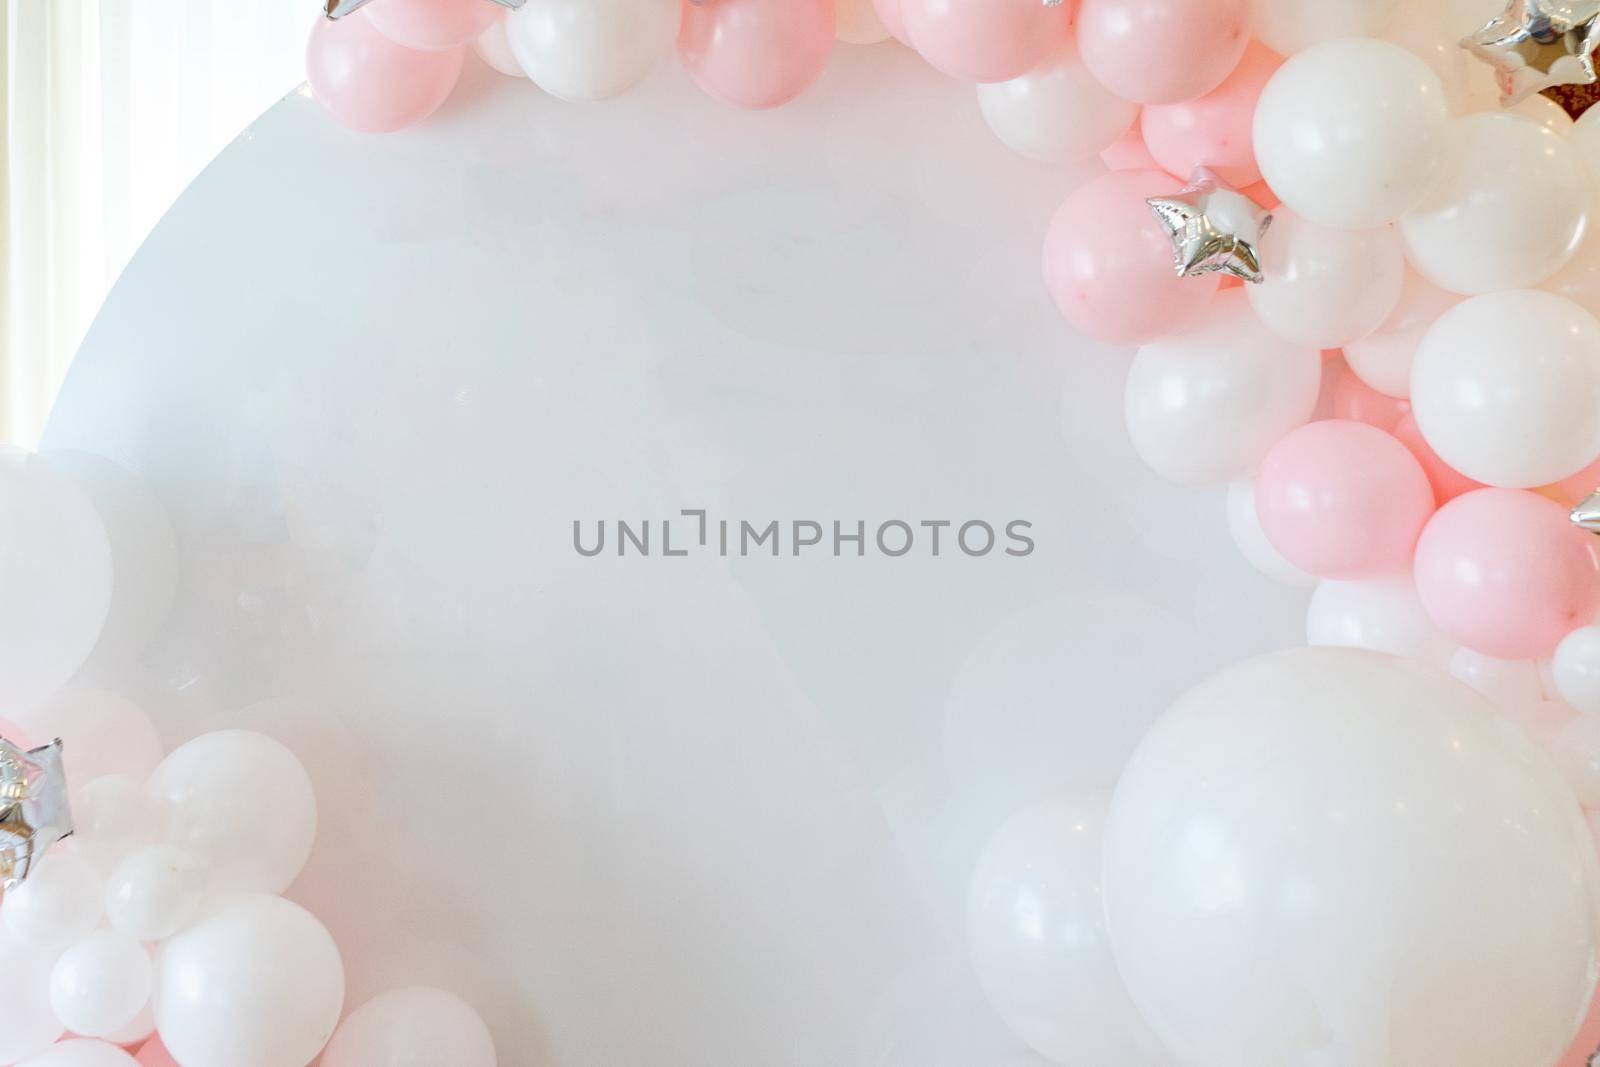 frame on a white background of pink and white balloons.